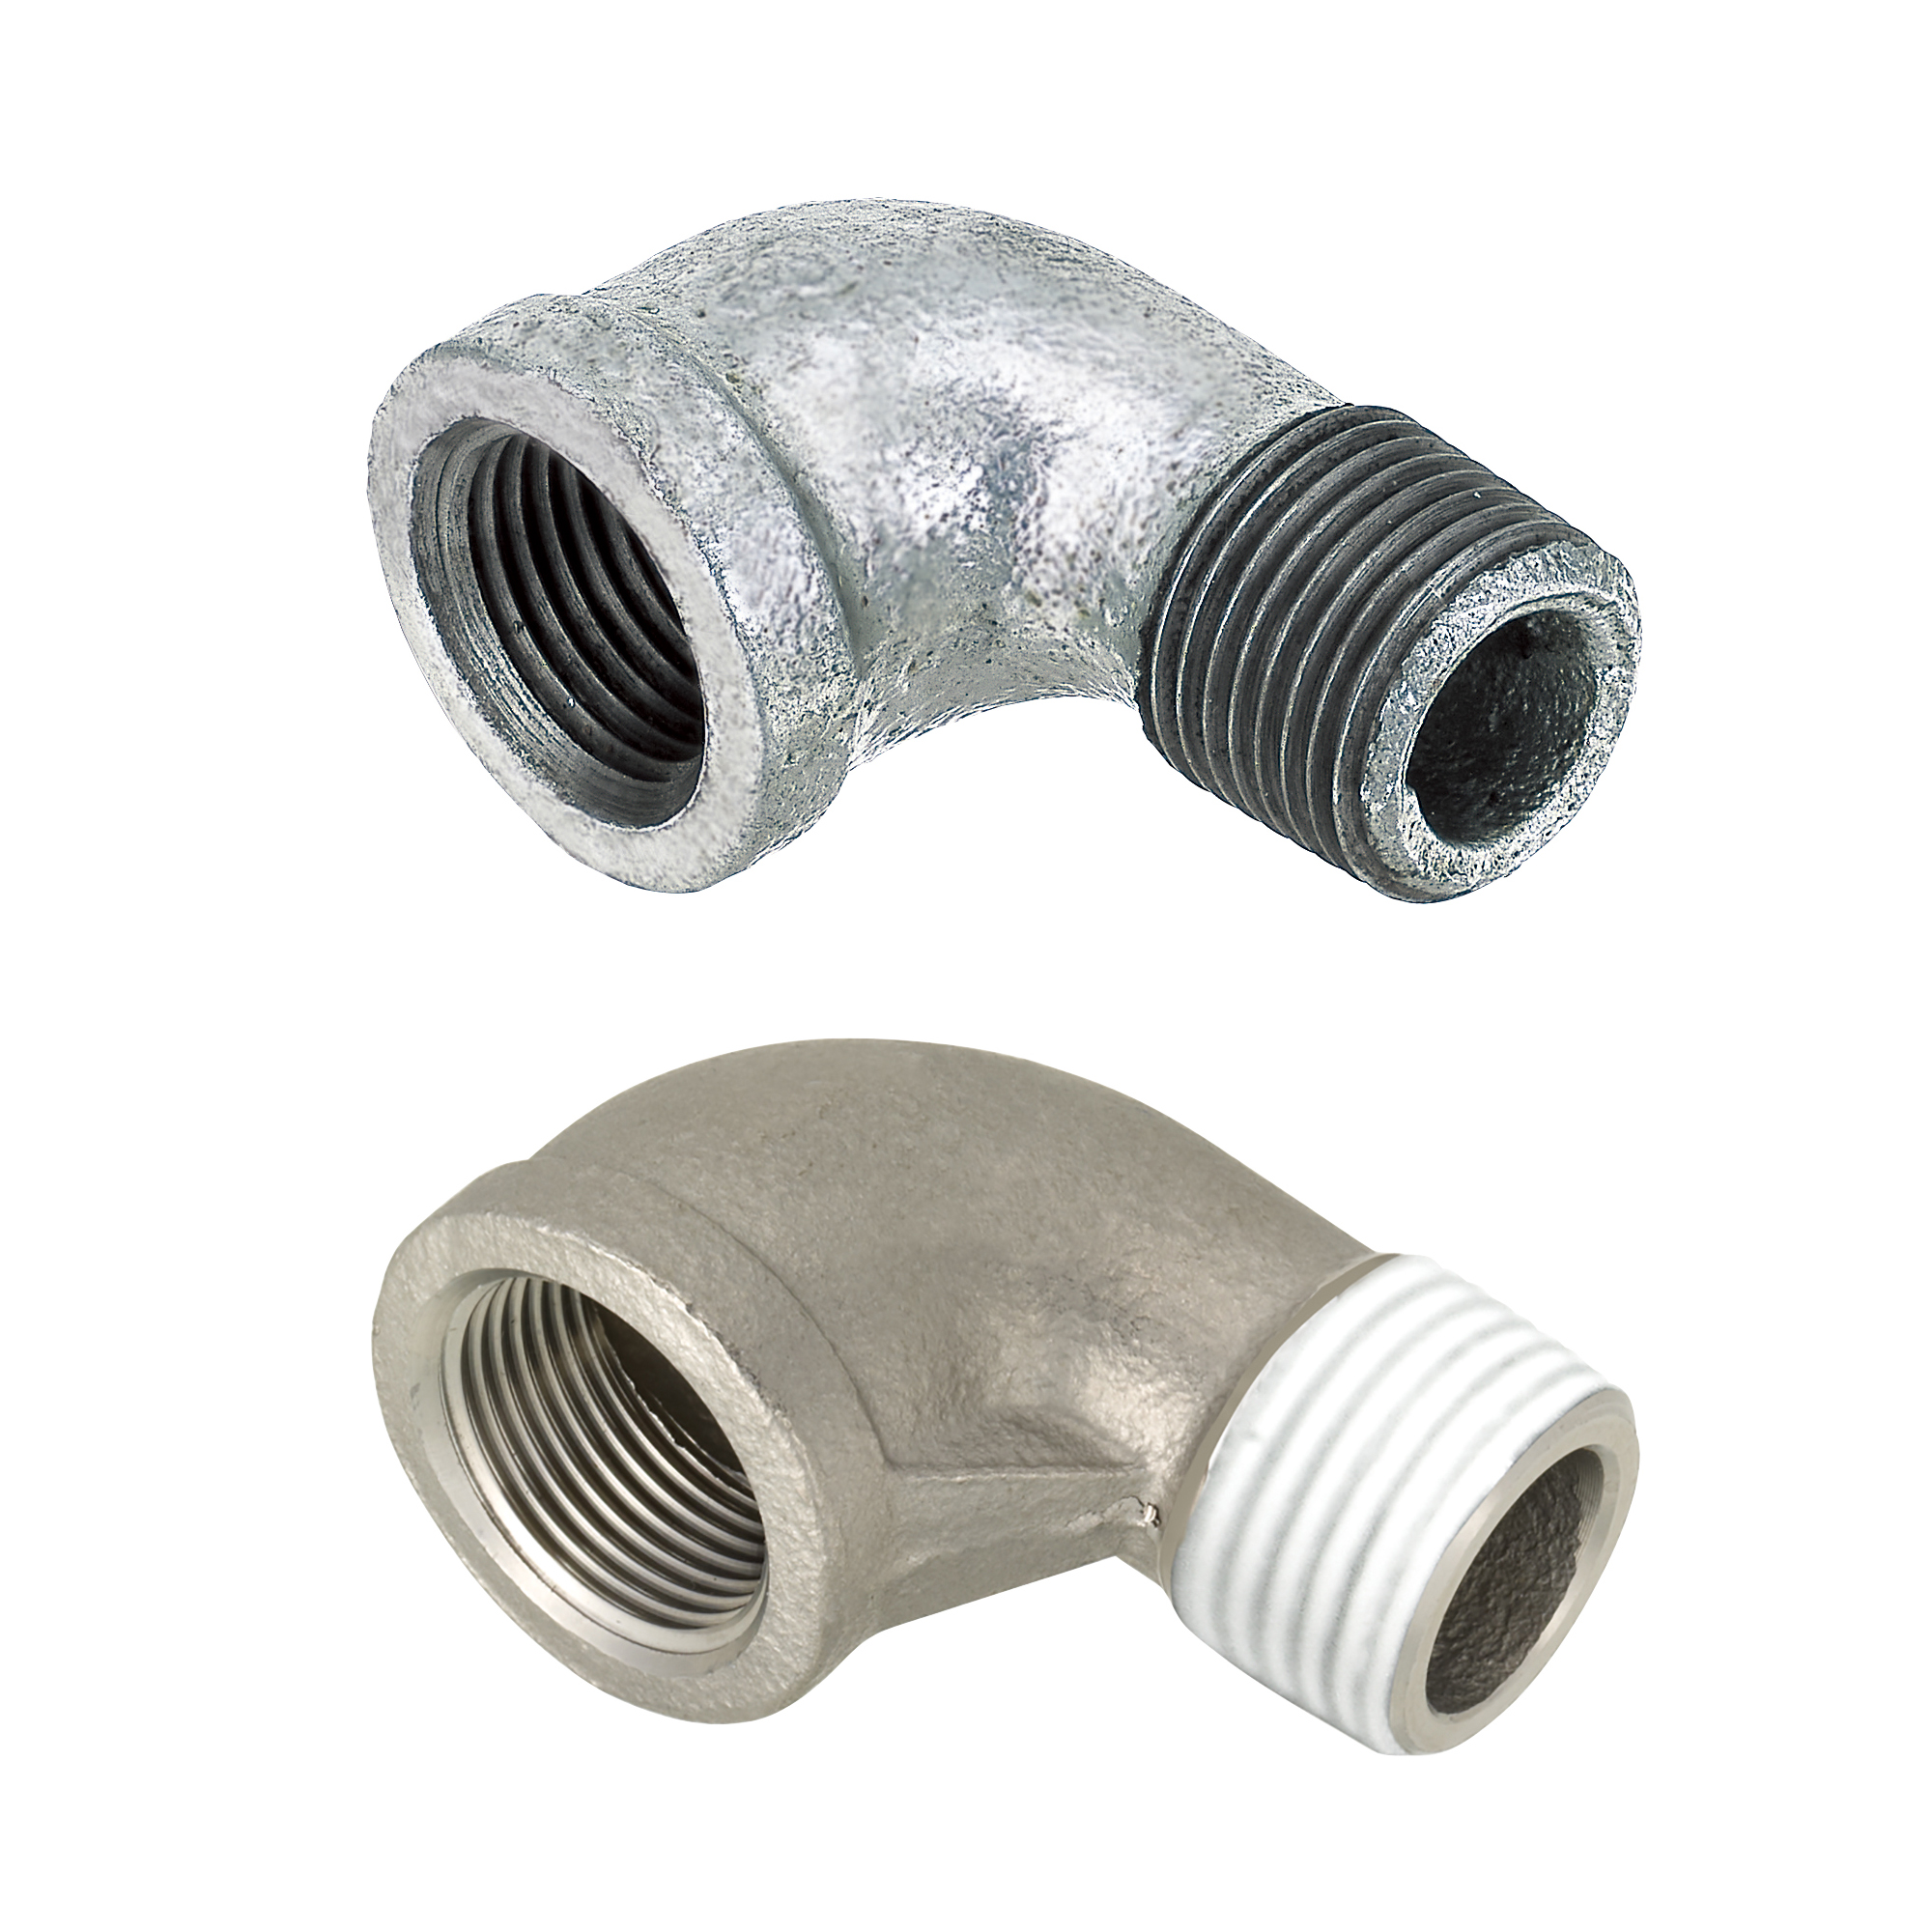 Low Pressure Fittings/90 Deg. Elbow/Threaded and Tapped (SUTPEL20A) 